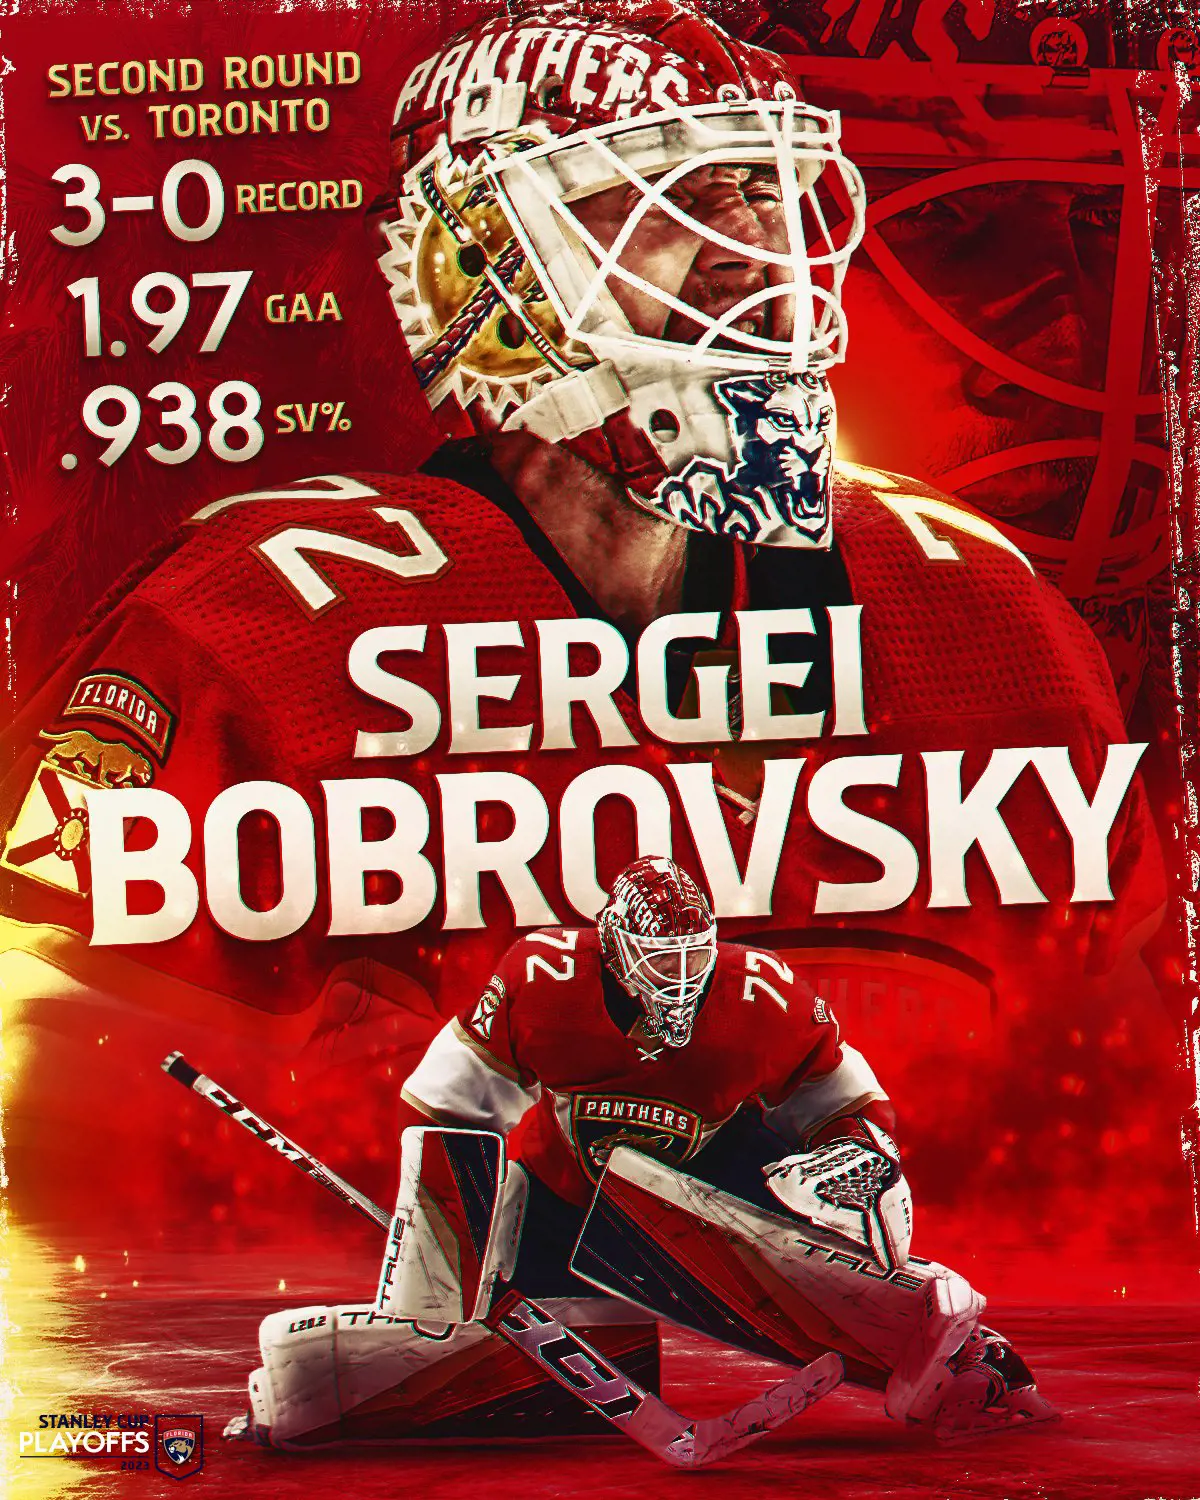 Bobrovrkiy has high chance of winning the conn smythe trophy against the Golden Knights in 2023.